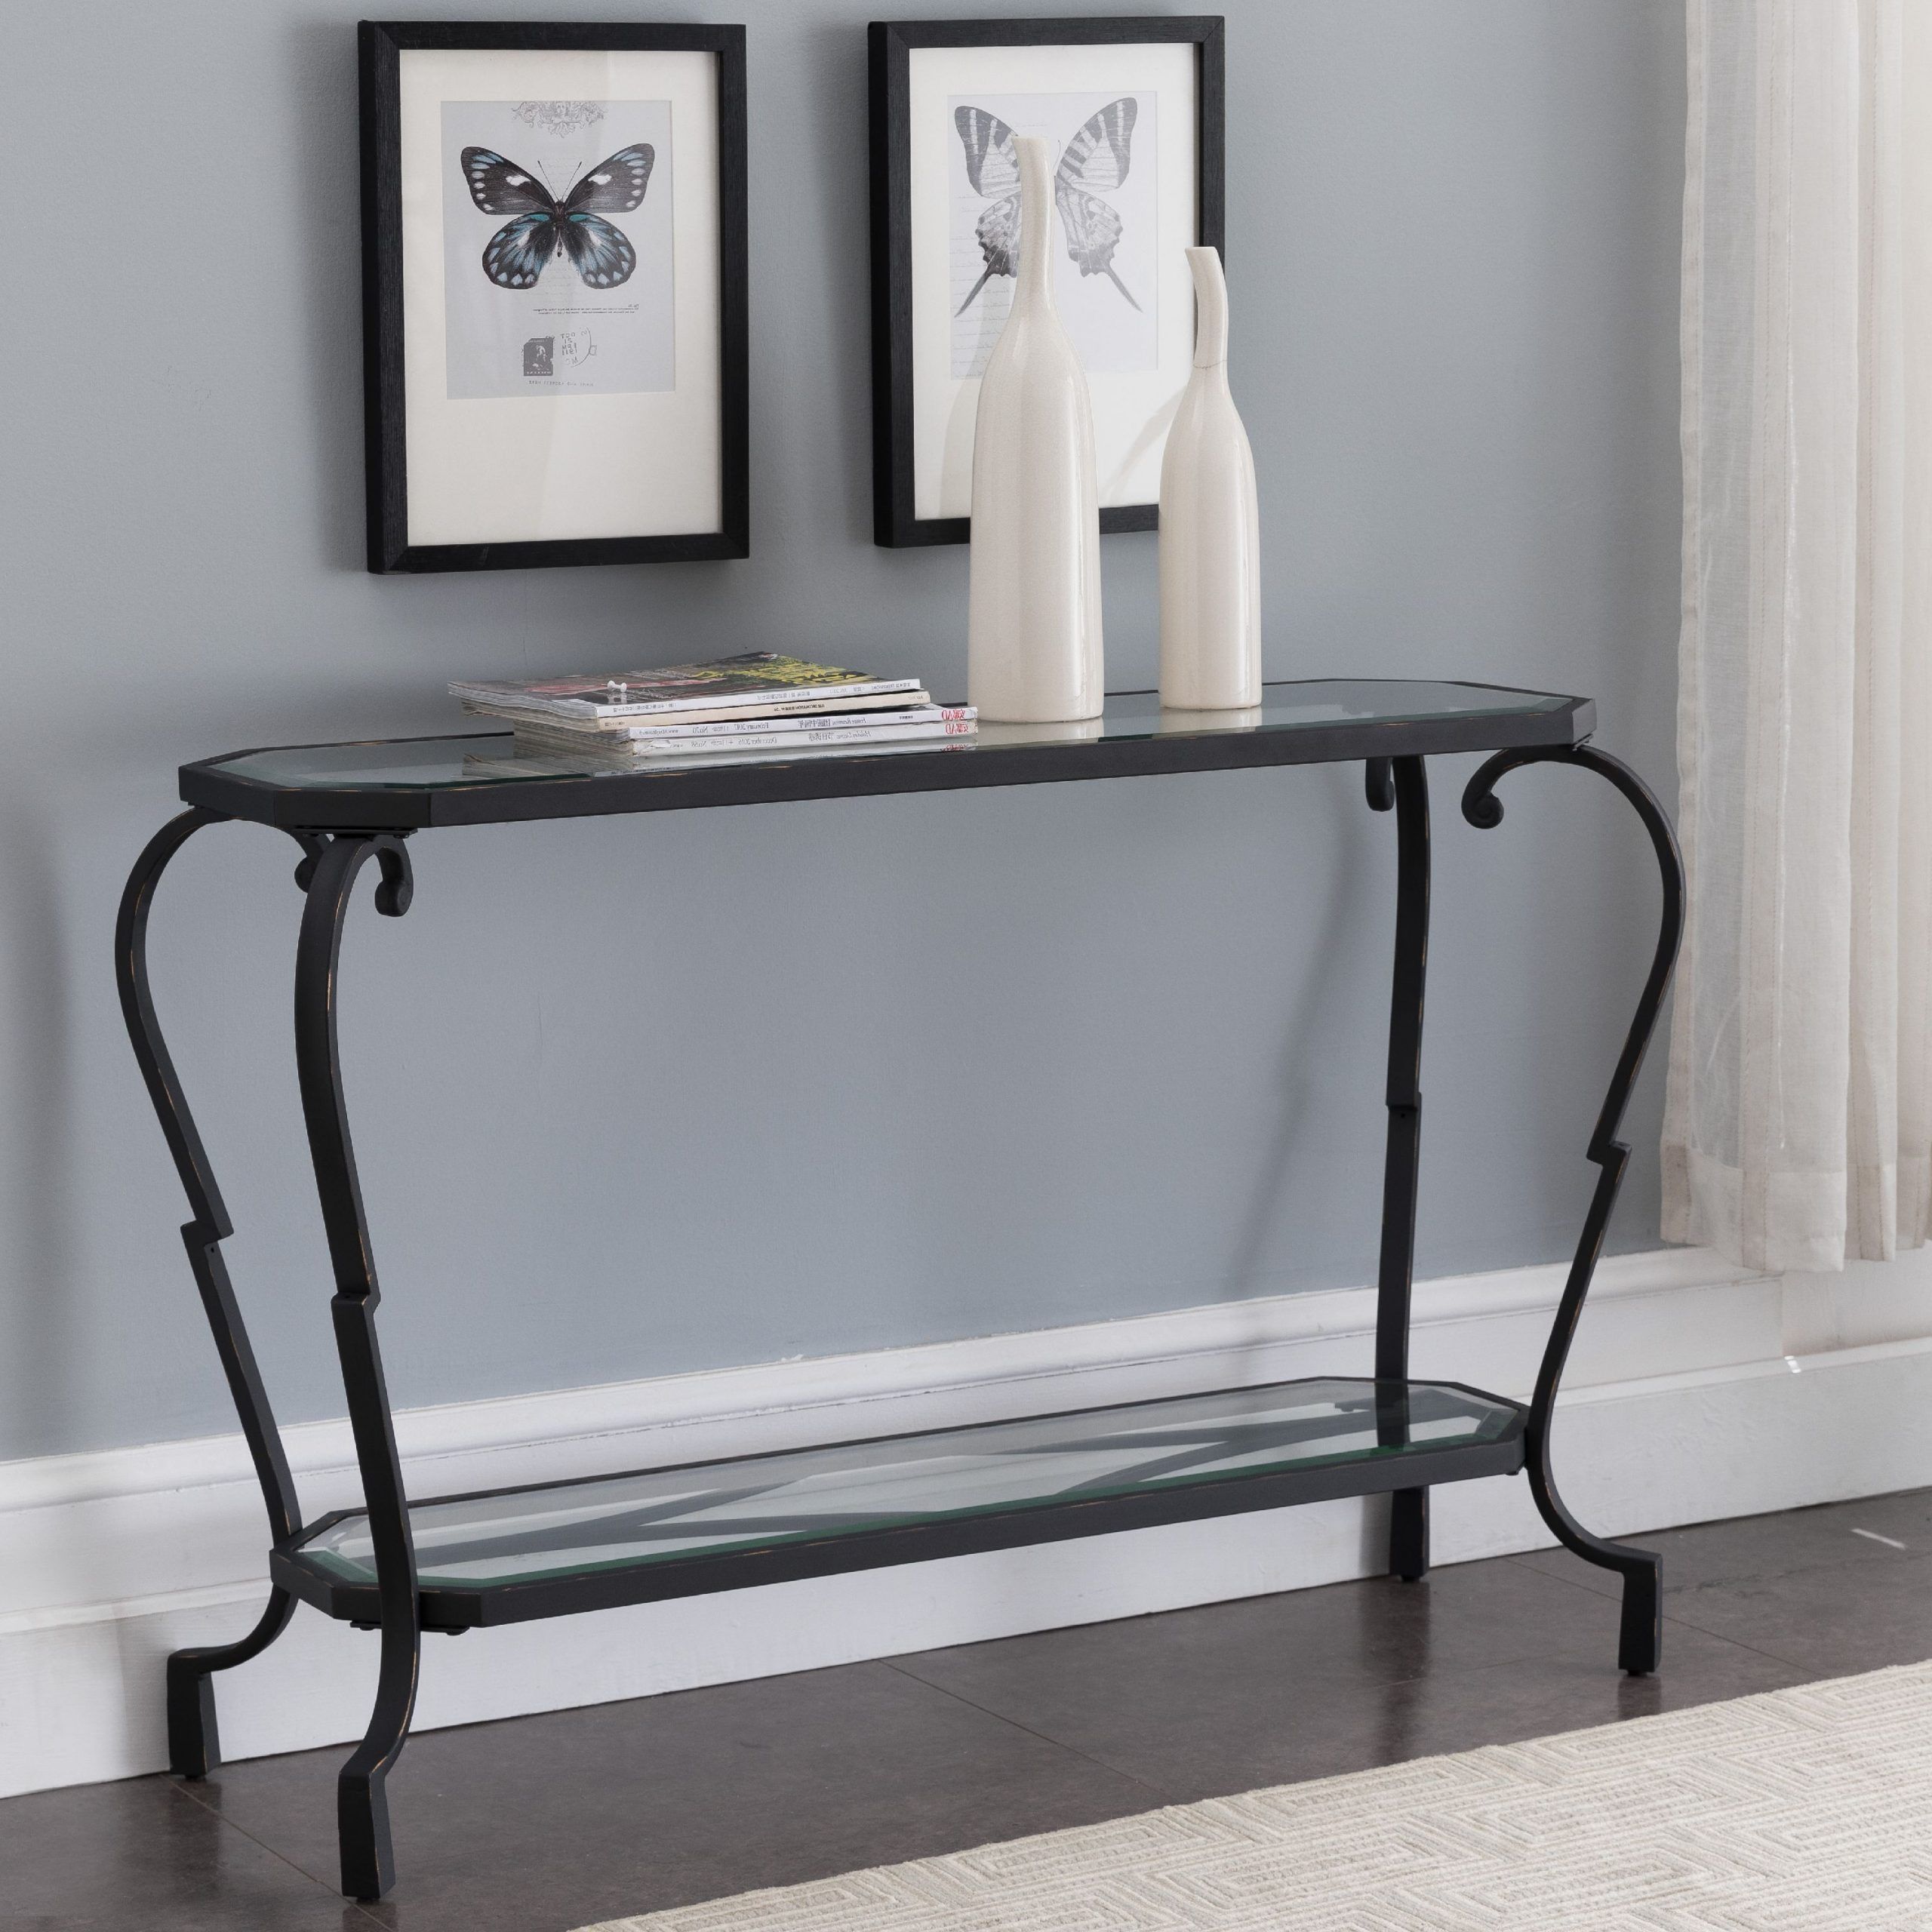 Jordan Modern Entryway Console Table, Textured Black Pertaining To Modern Console Tables (View 15 of 20)